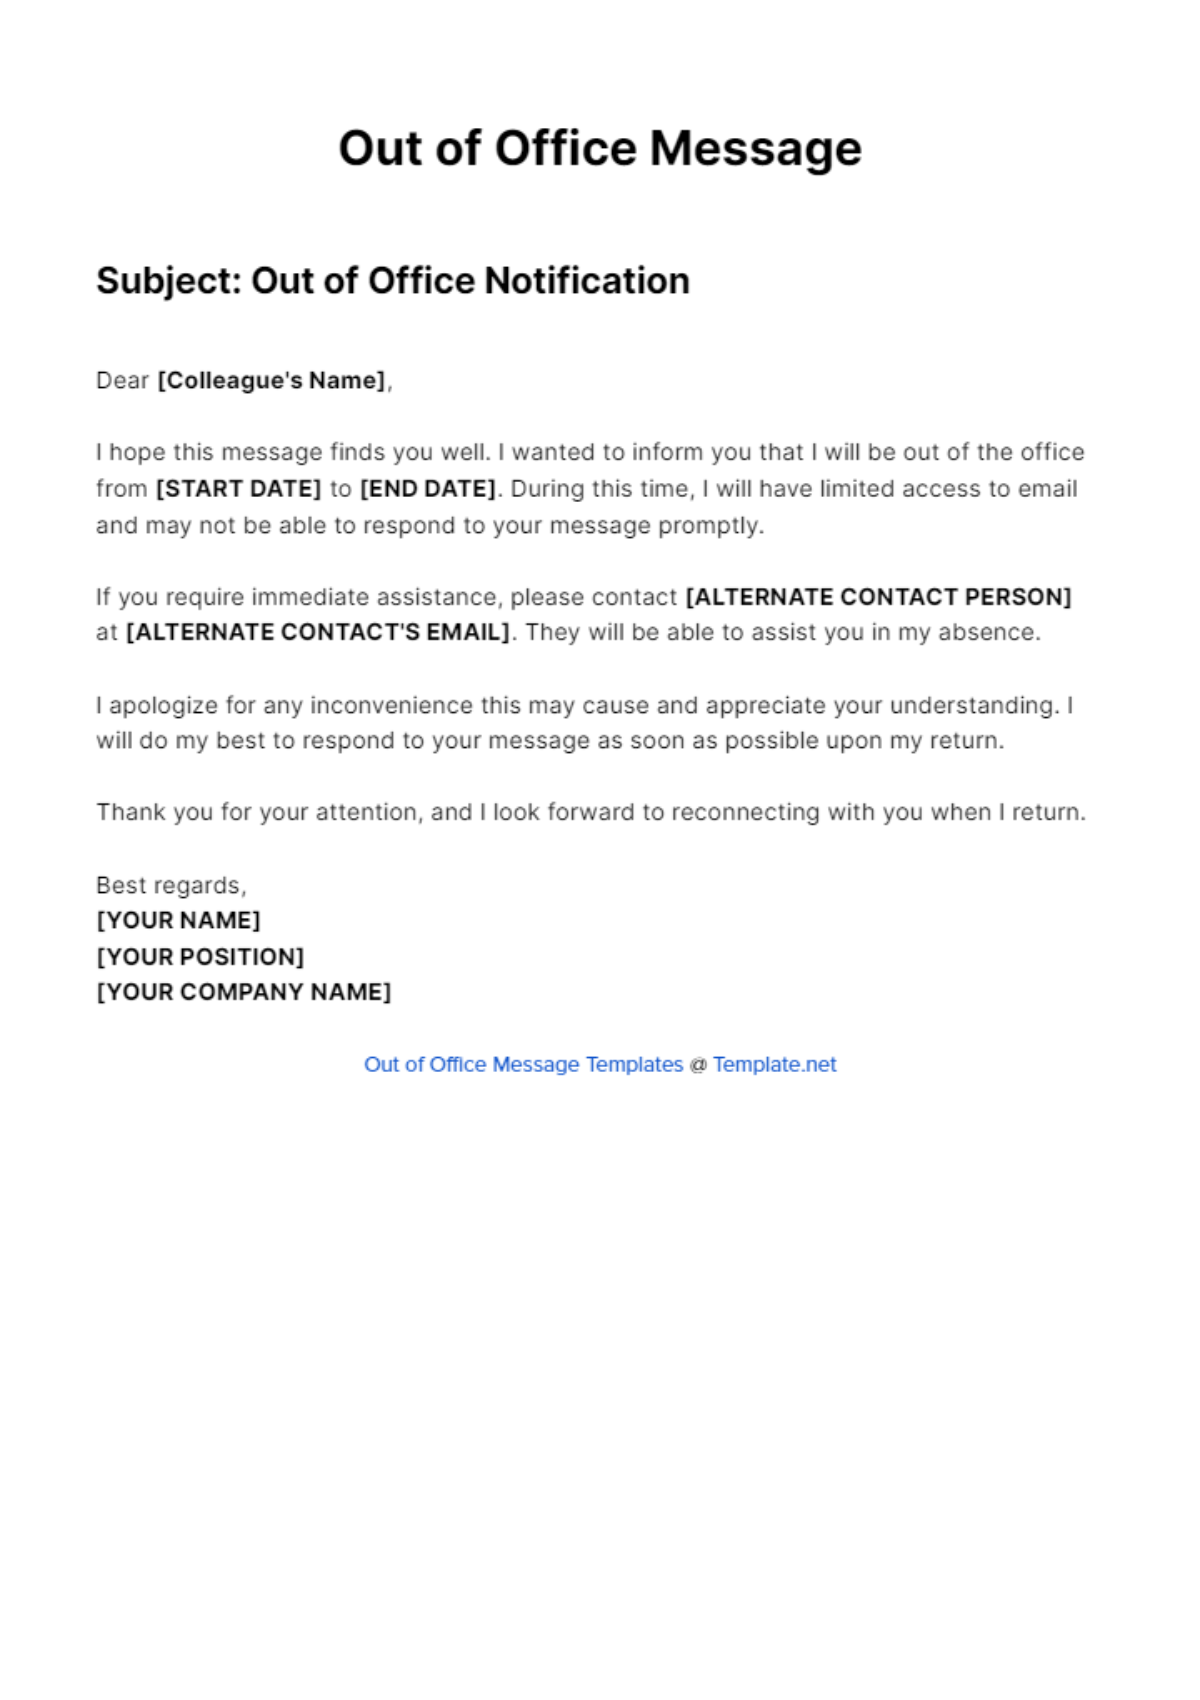 Temporarily Out Of Office Message Template